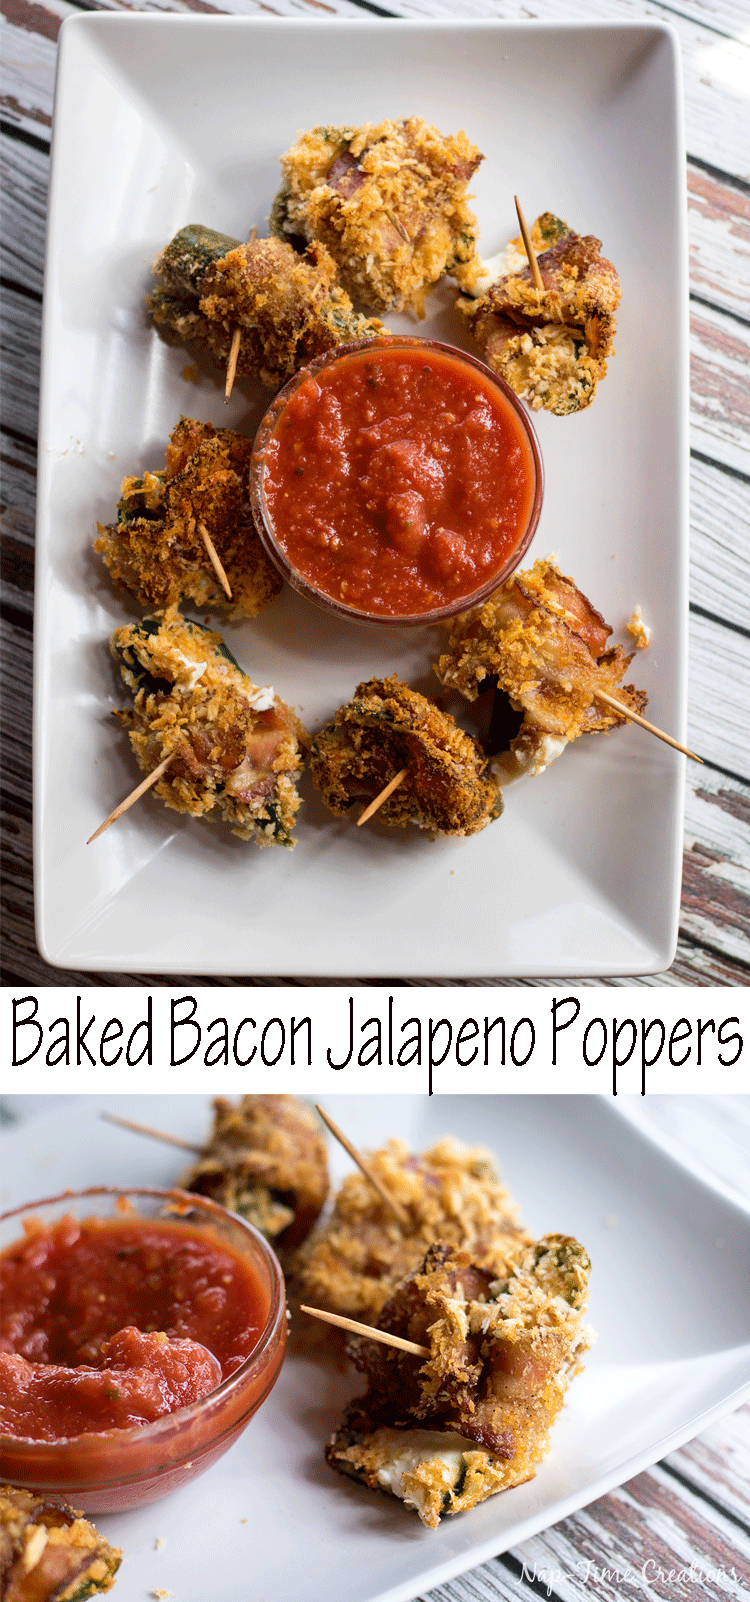 baked bacon wrapped jalepeno poppers from-nap-time-creations